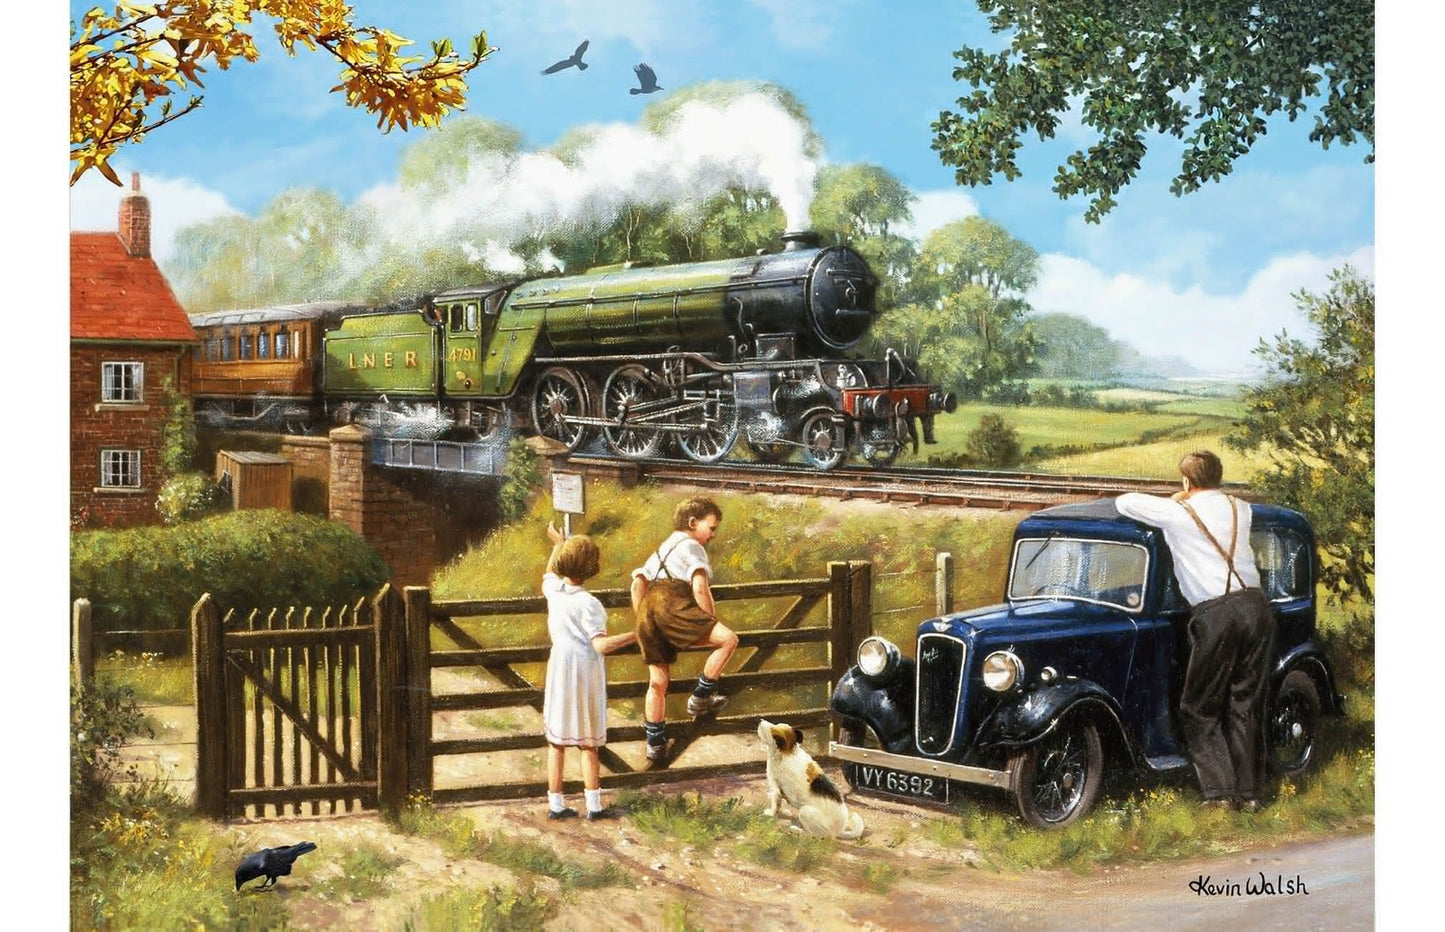 Kidicraft - Passing By - 1000 Piece Jigsaw Puzzle